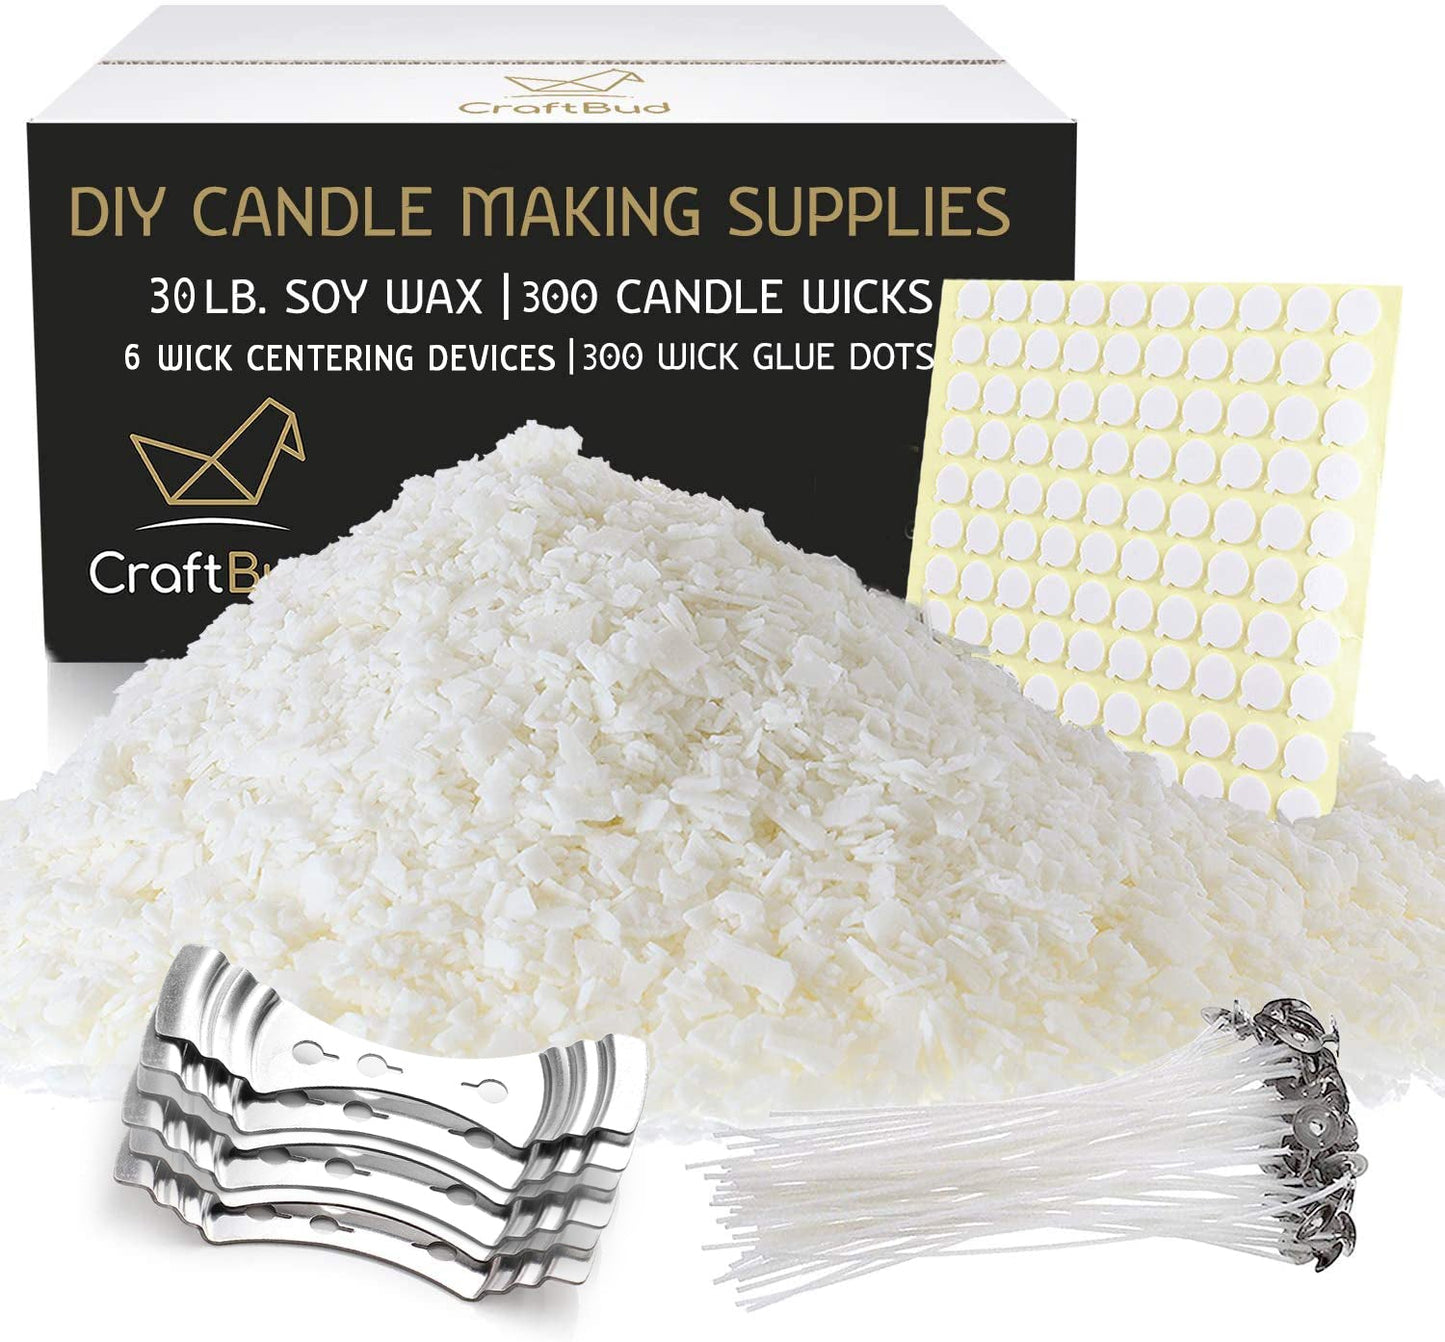 30 lb Natural Soy Candle Wax for Candle Making with Cotton Candle Wicks, Wick Stickers, and Centering Devices